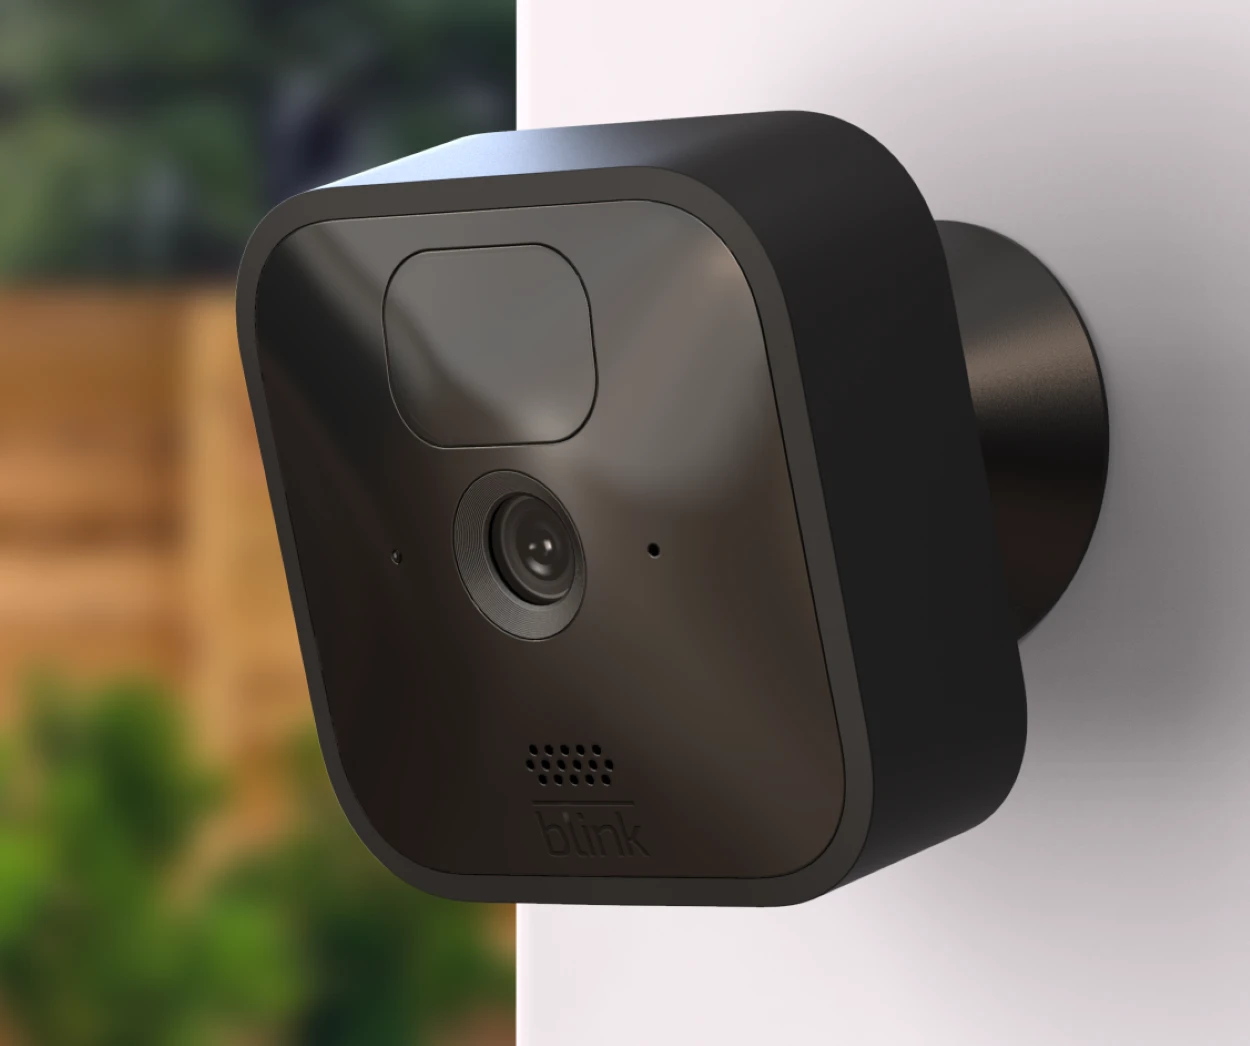 close up image of a blink outdoor camera.